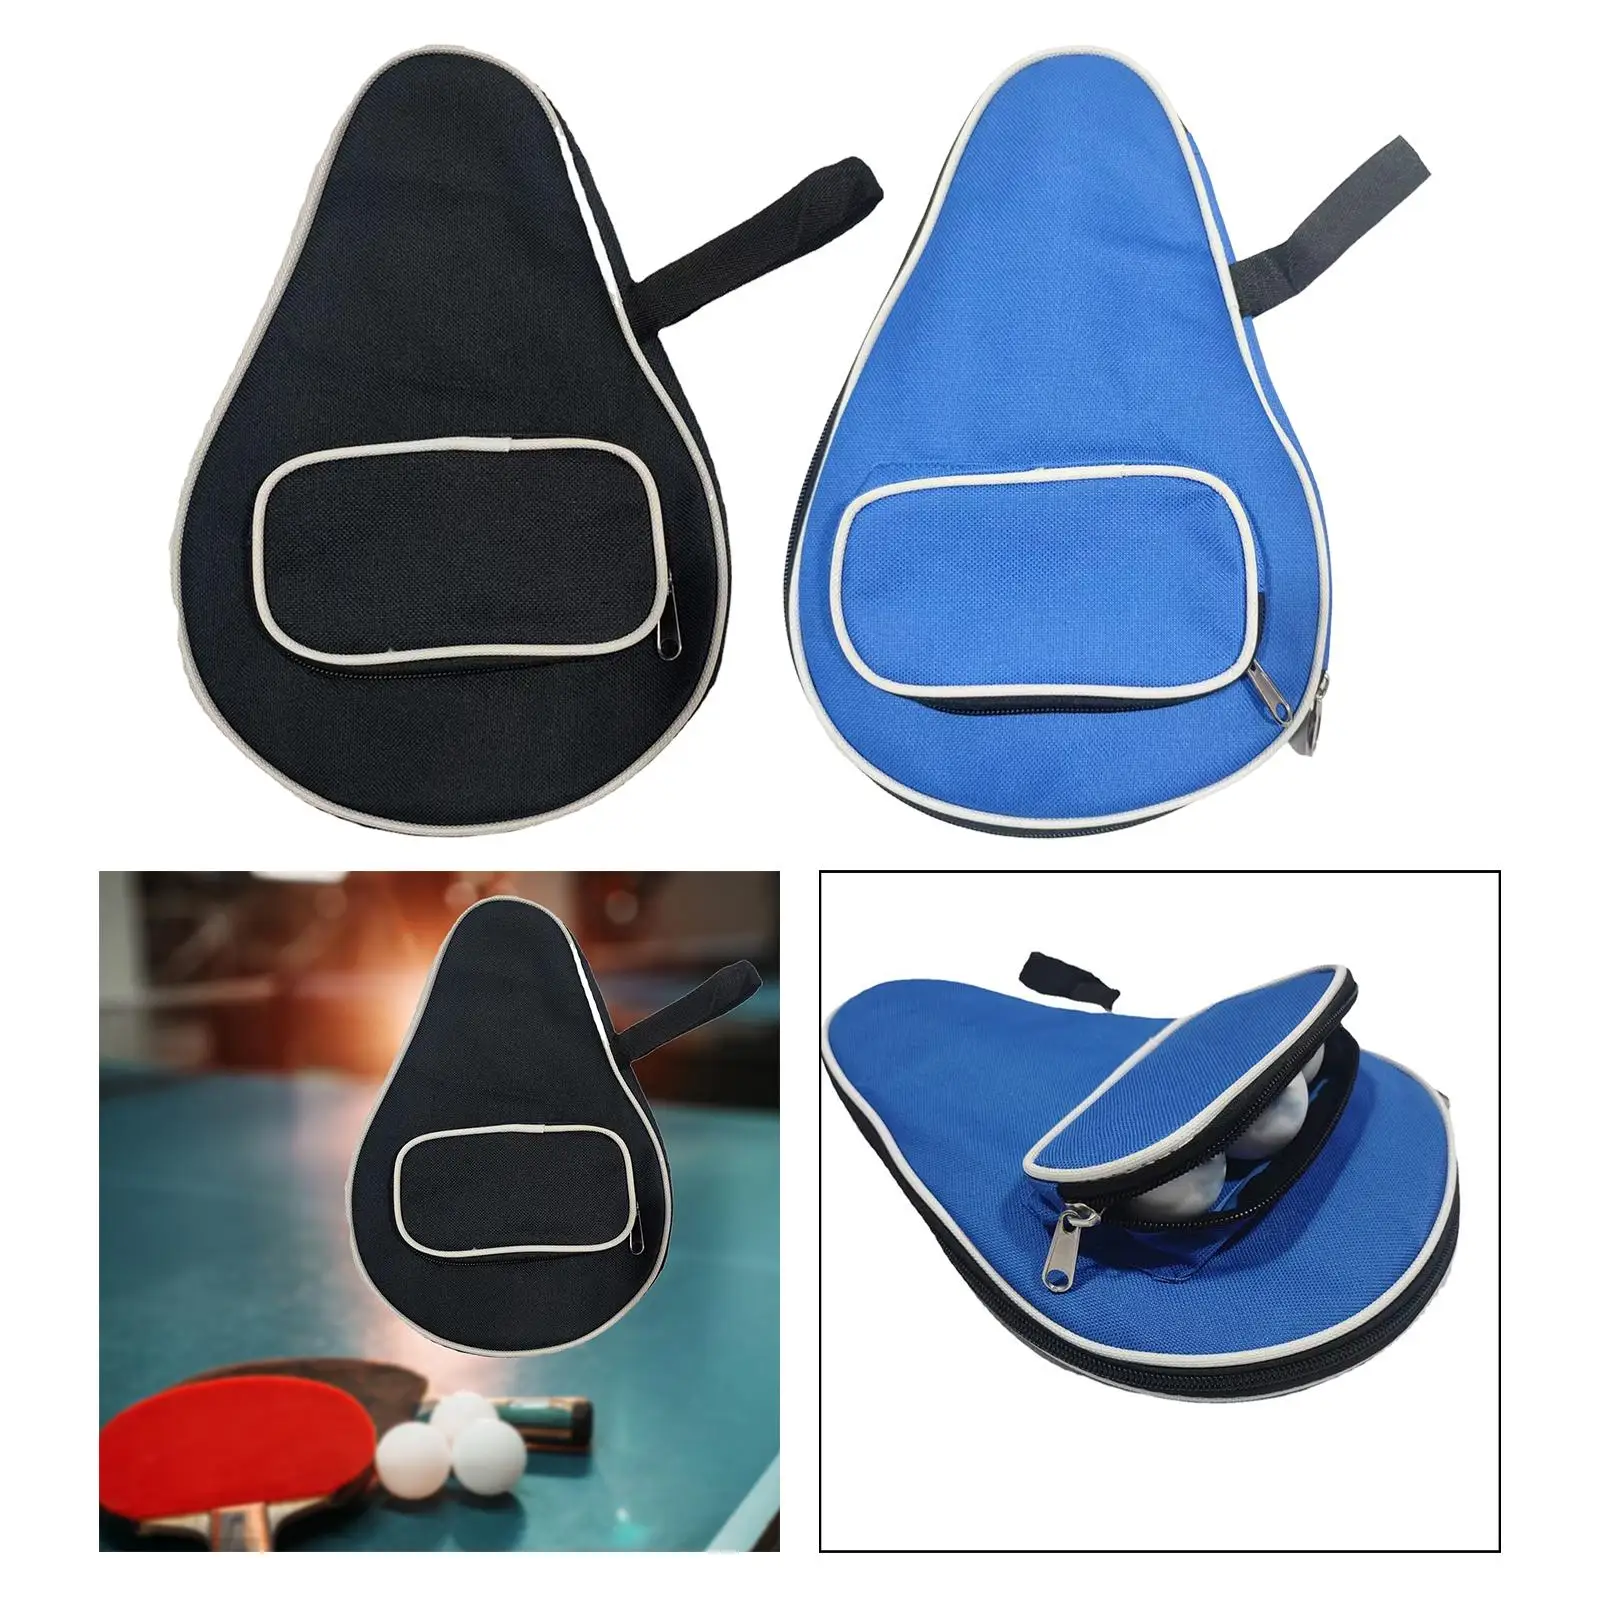 Table Tennis Racket Cover Portable Large Capacity Lightweight with Zipper Racket Pocket for Indoor Training Competition Travel